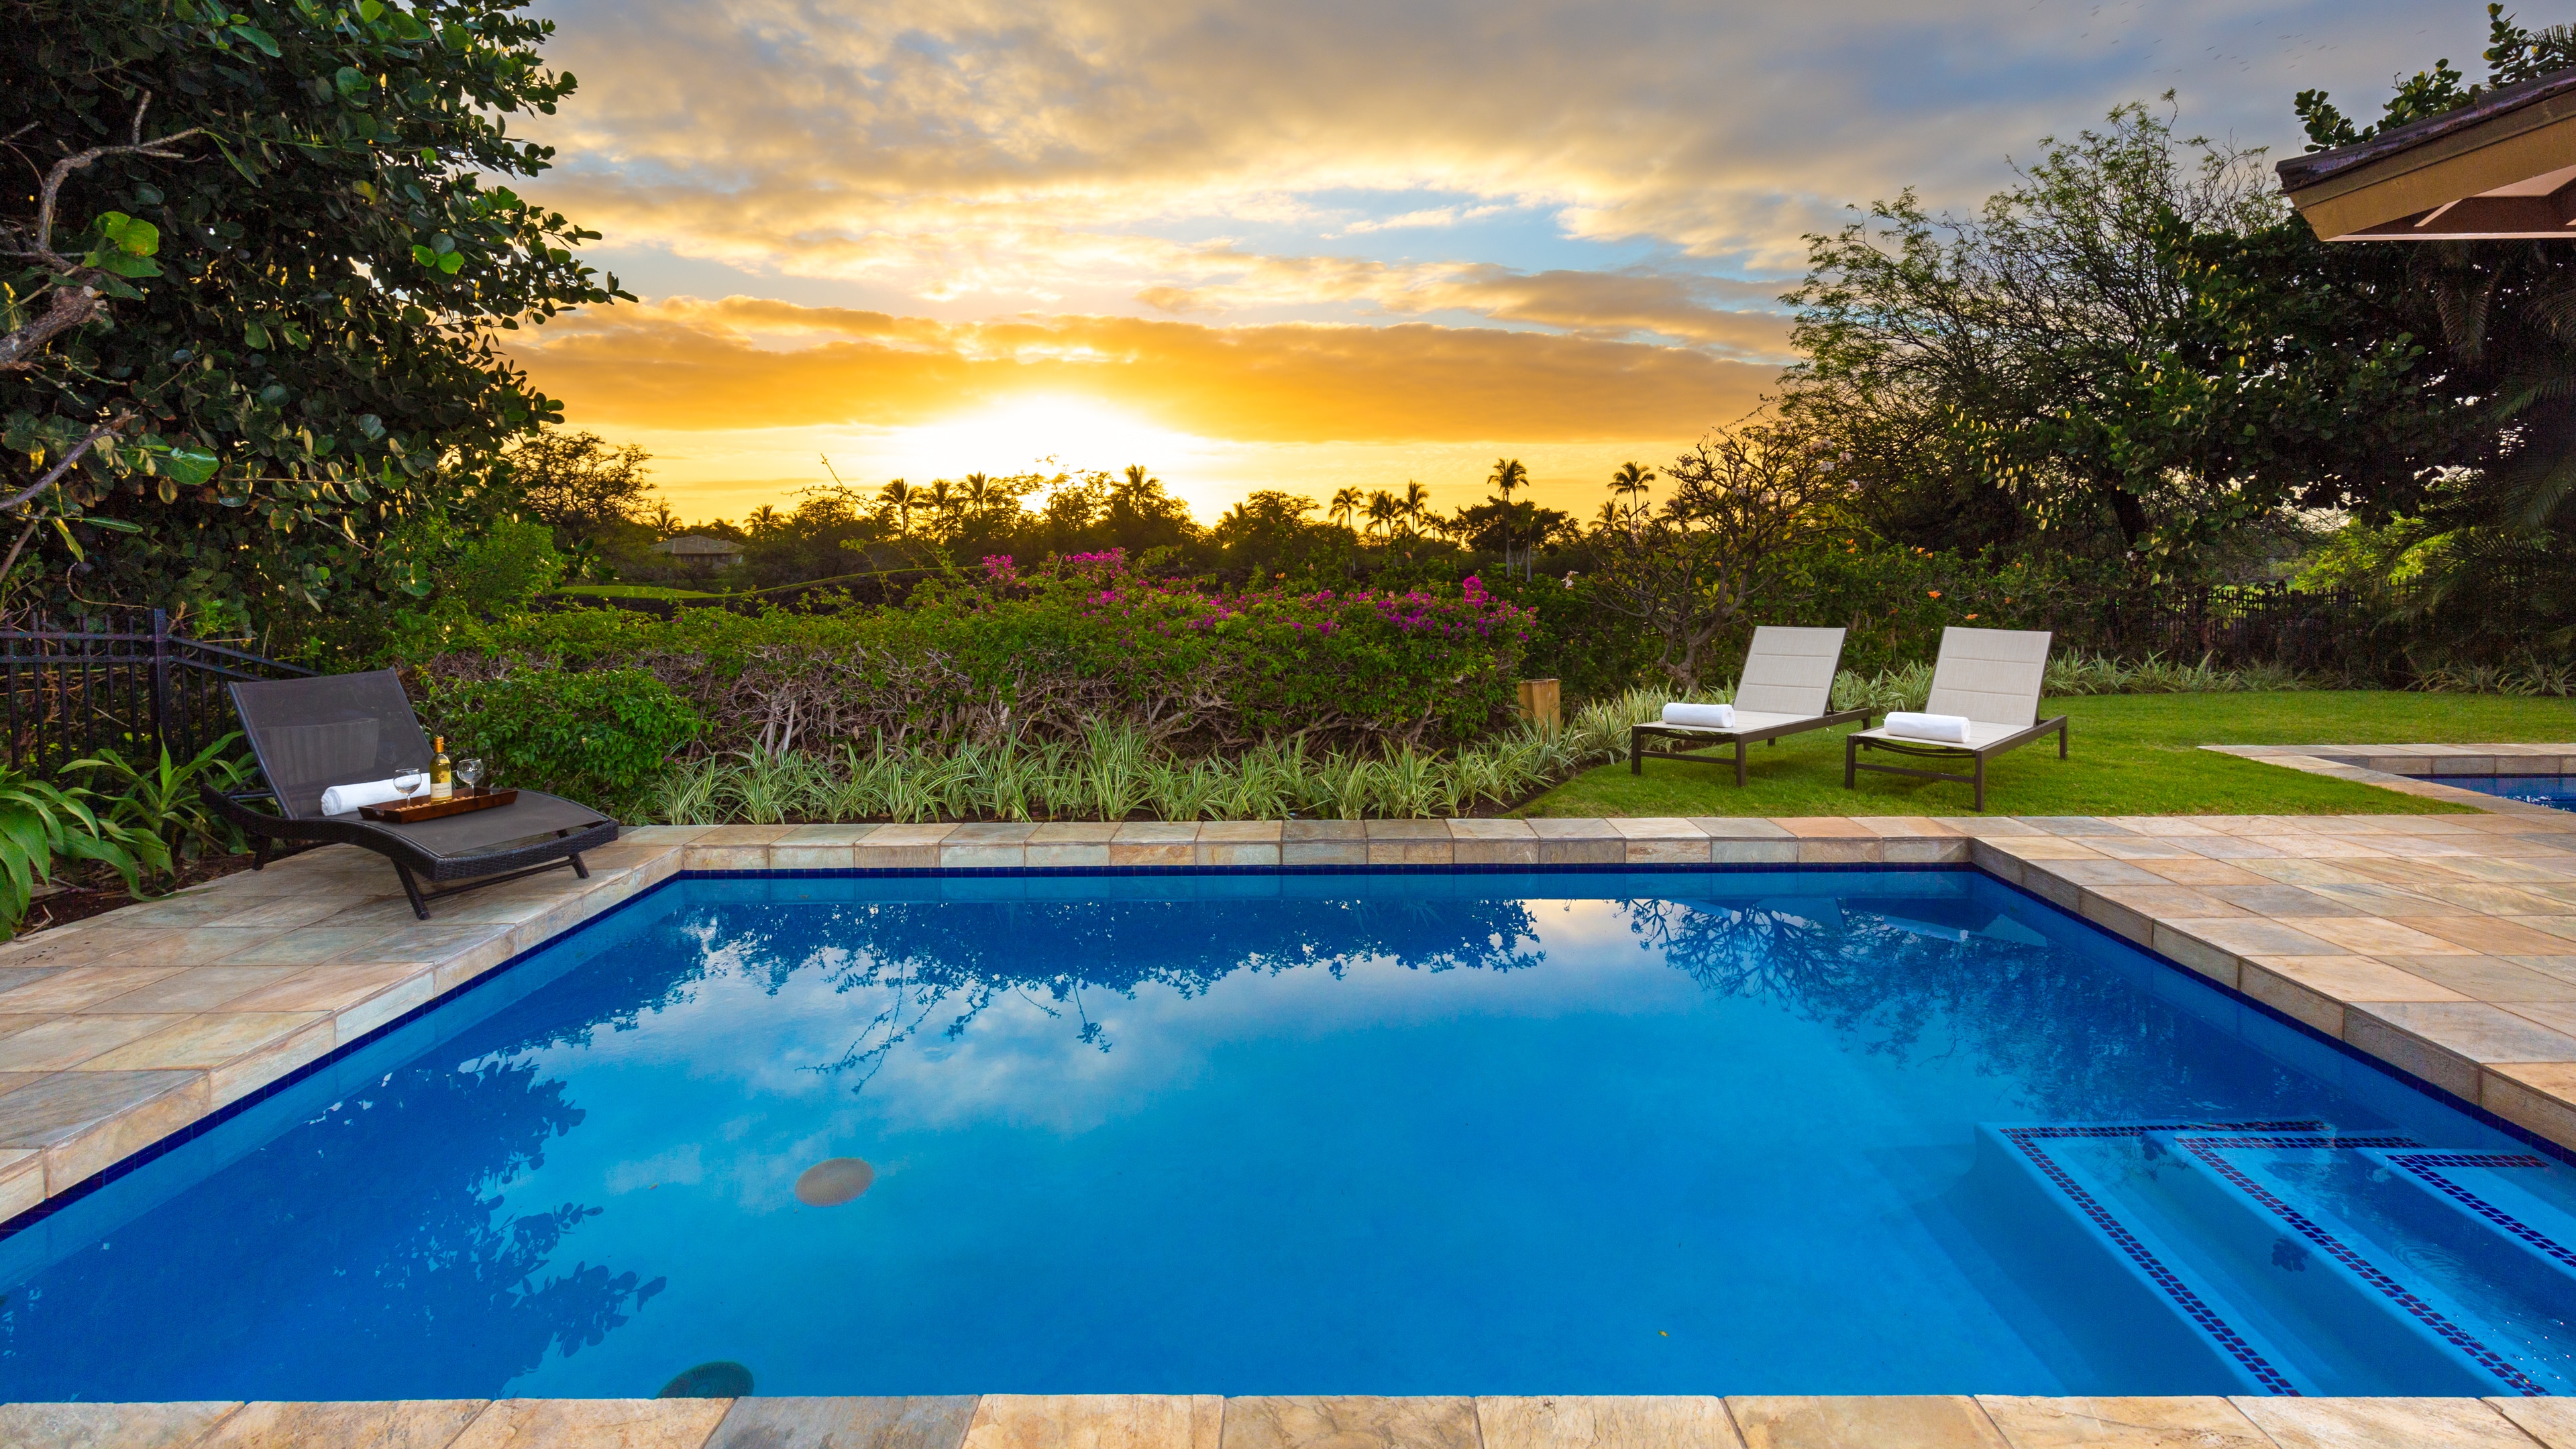 Welcome to Coral Reef Villa! Private heated pool